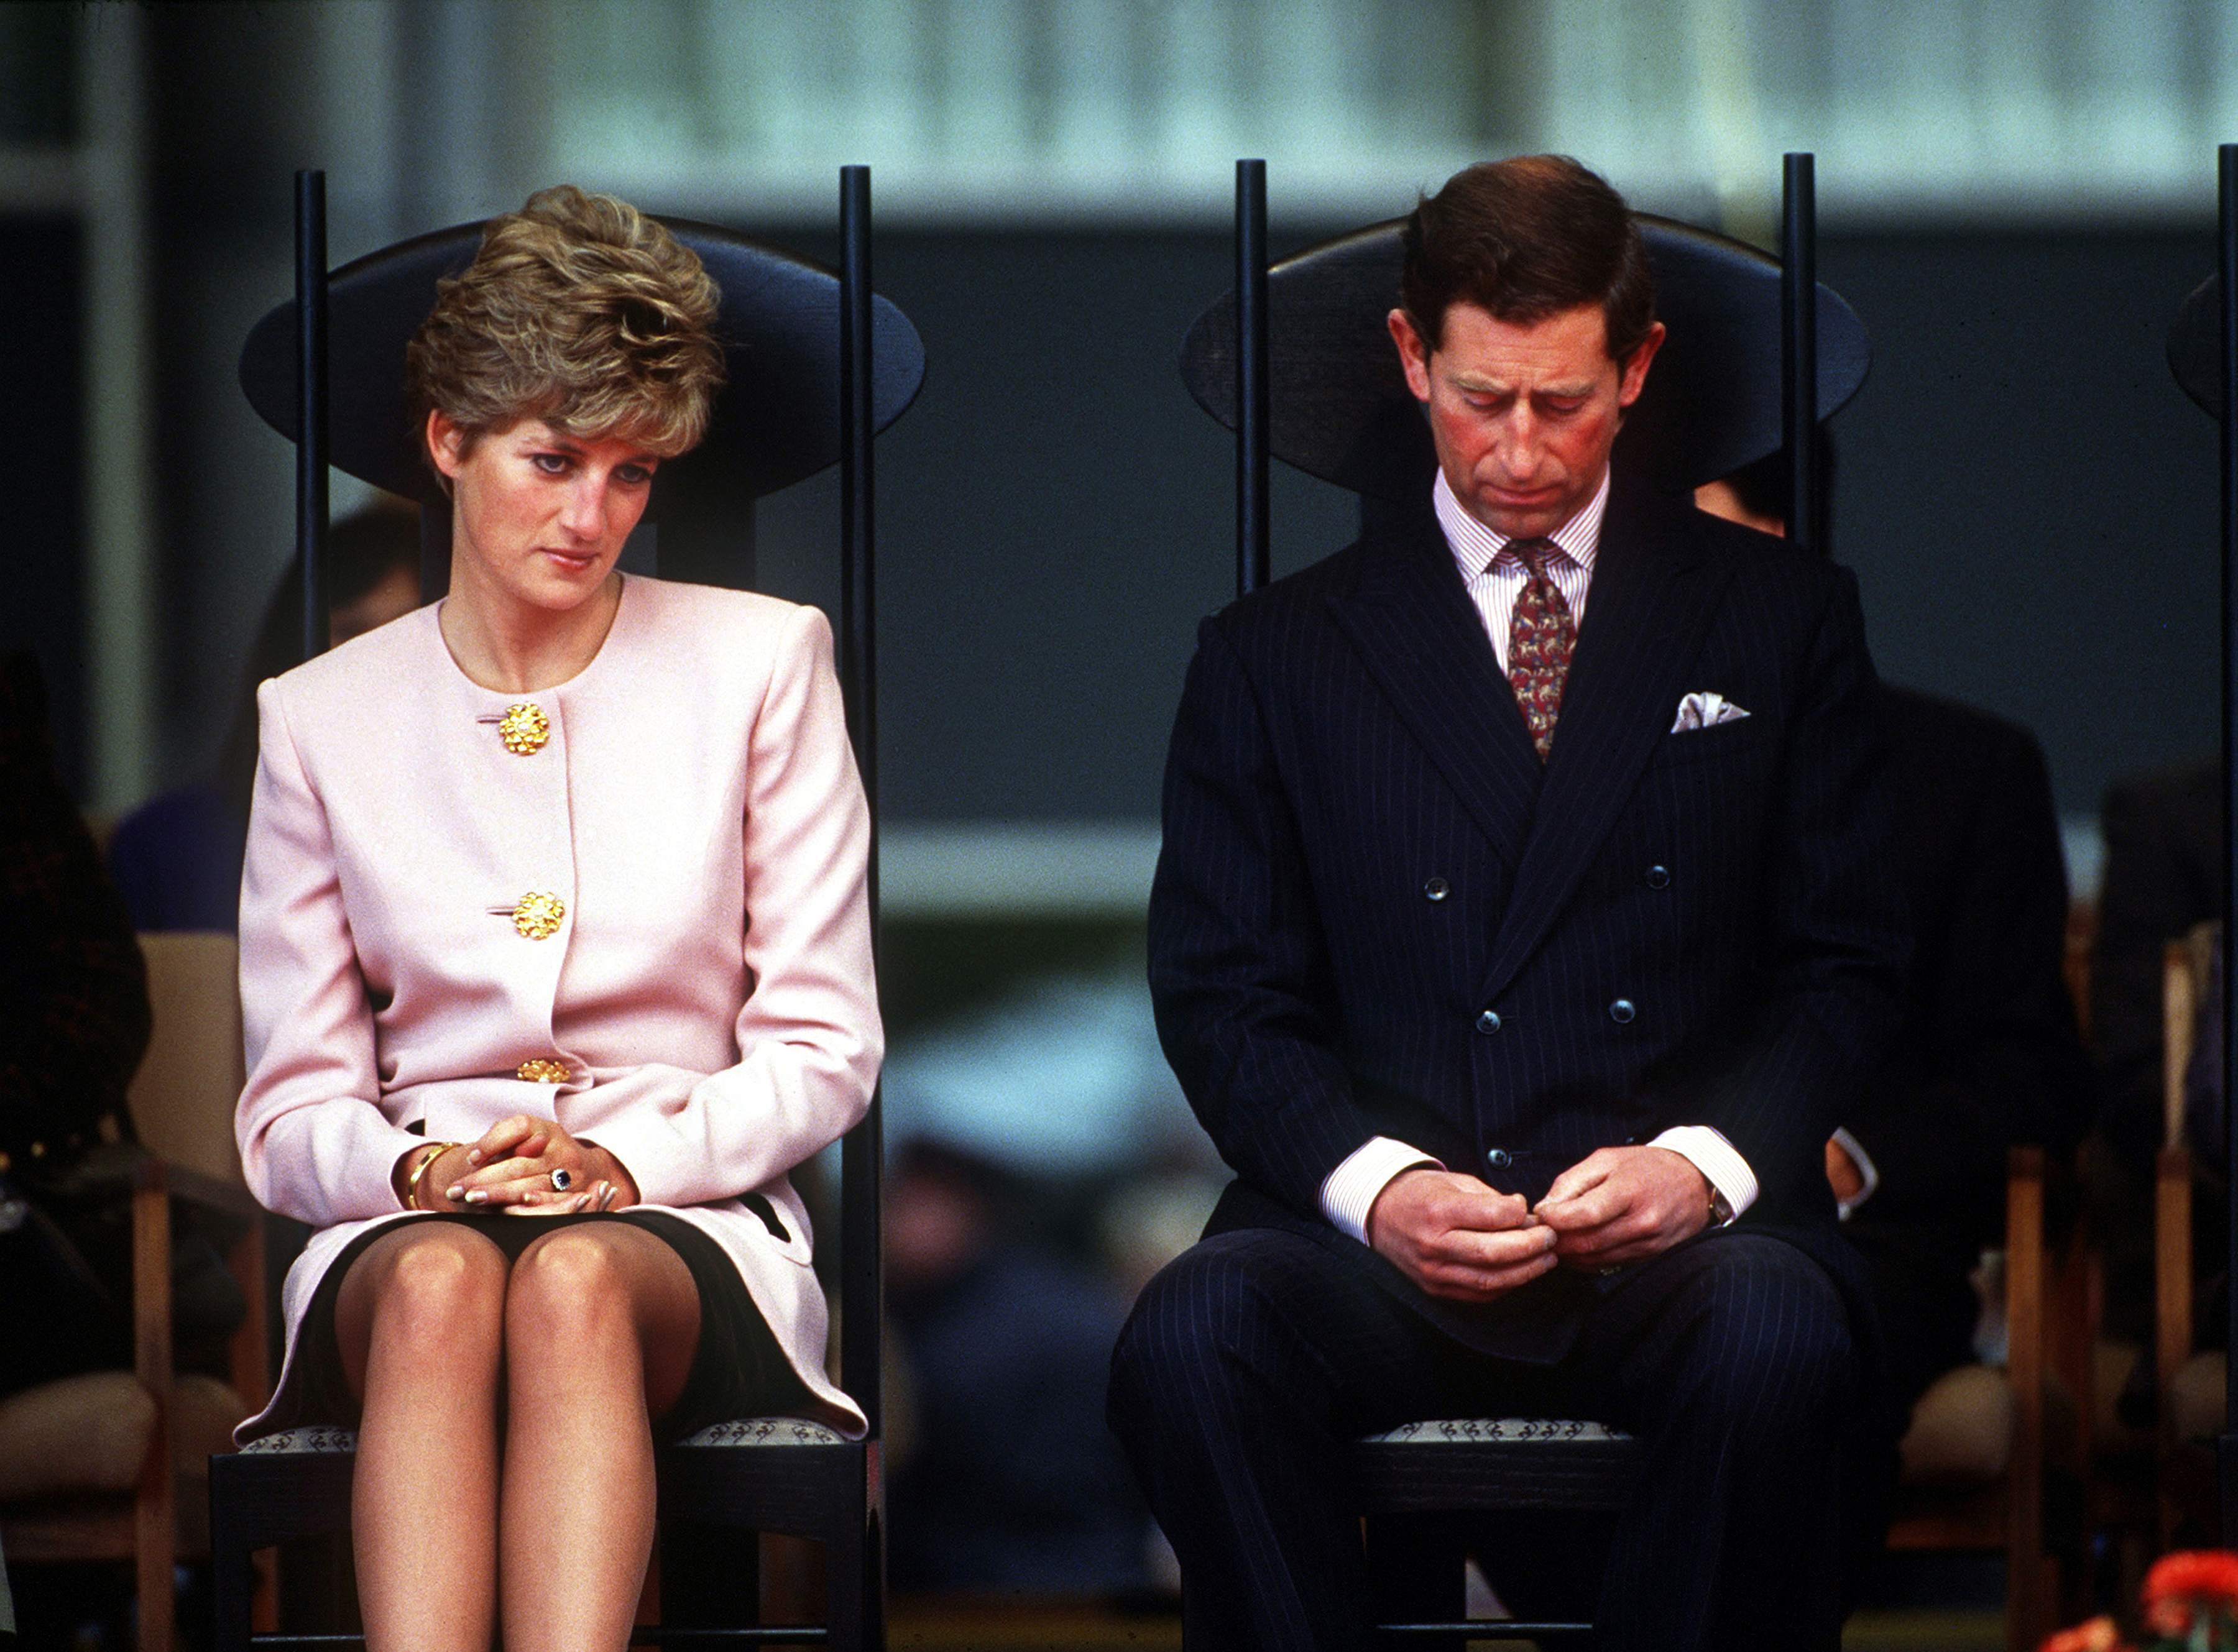 Princess Diana and Prince Charles at a welcome ceremony in Toronto, Canada, in October 1991 | Source: Getty Images